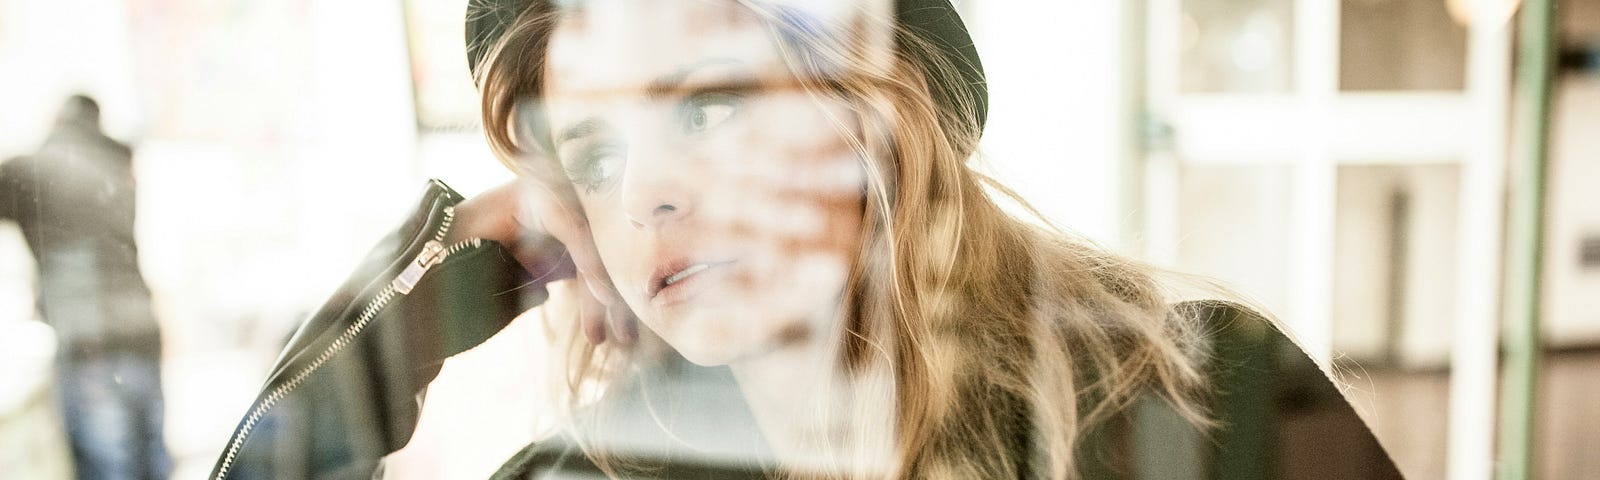 A young blonde woman looks out a window. The outside world is reflected in the glass. She looks sad or contemplative. It’s a close-up shot.